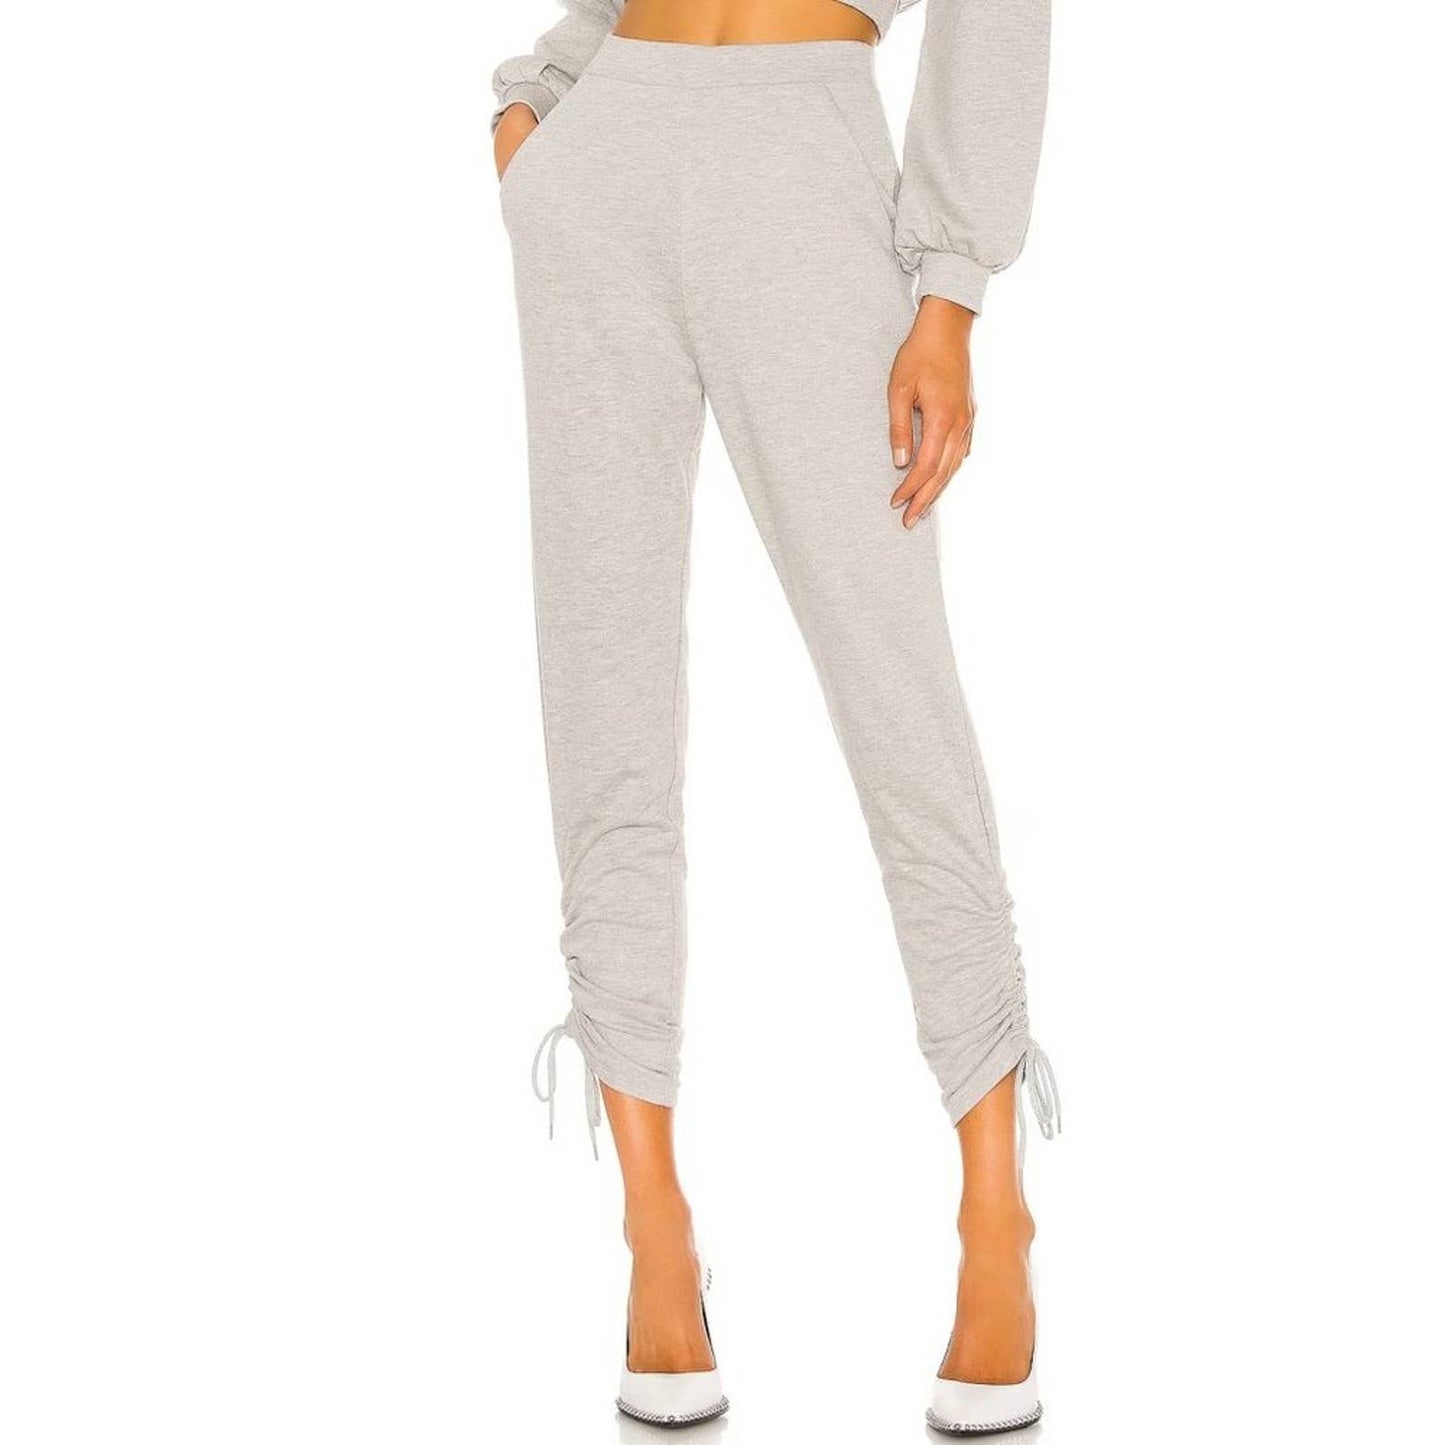 Lovers and Friends Evette Jogger in Heather Gray NWOT Size Small